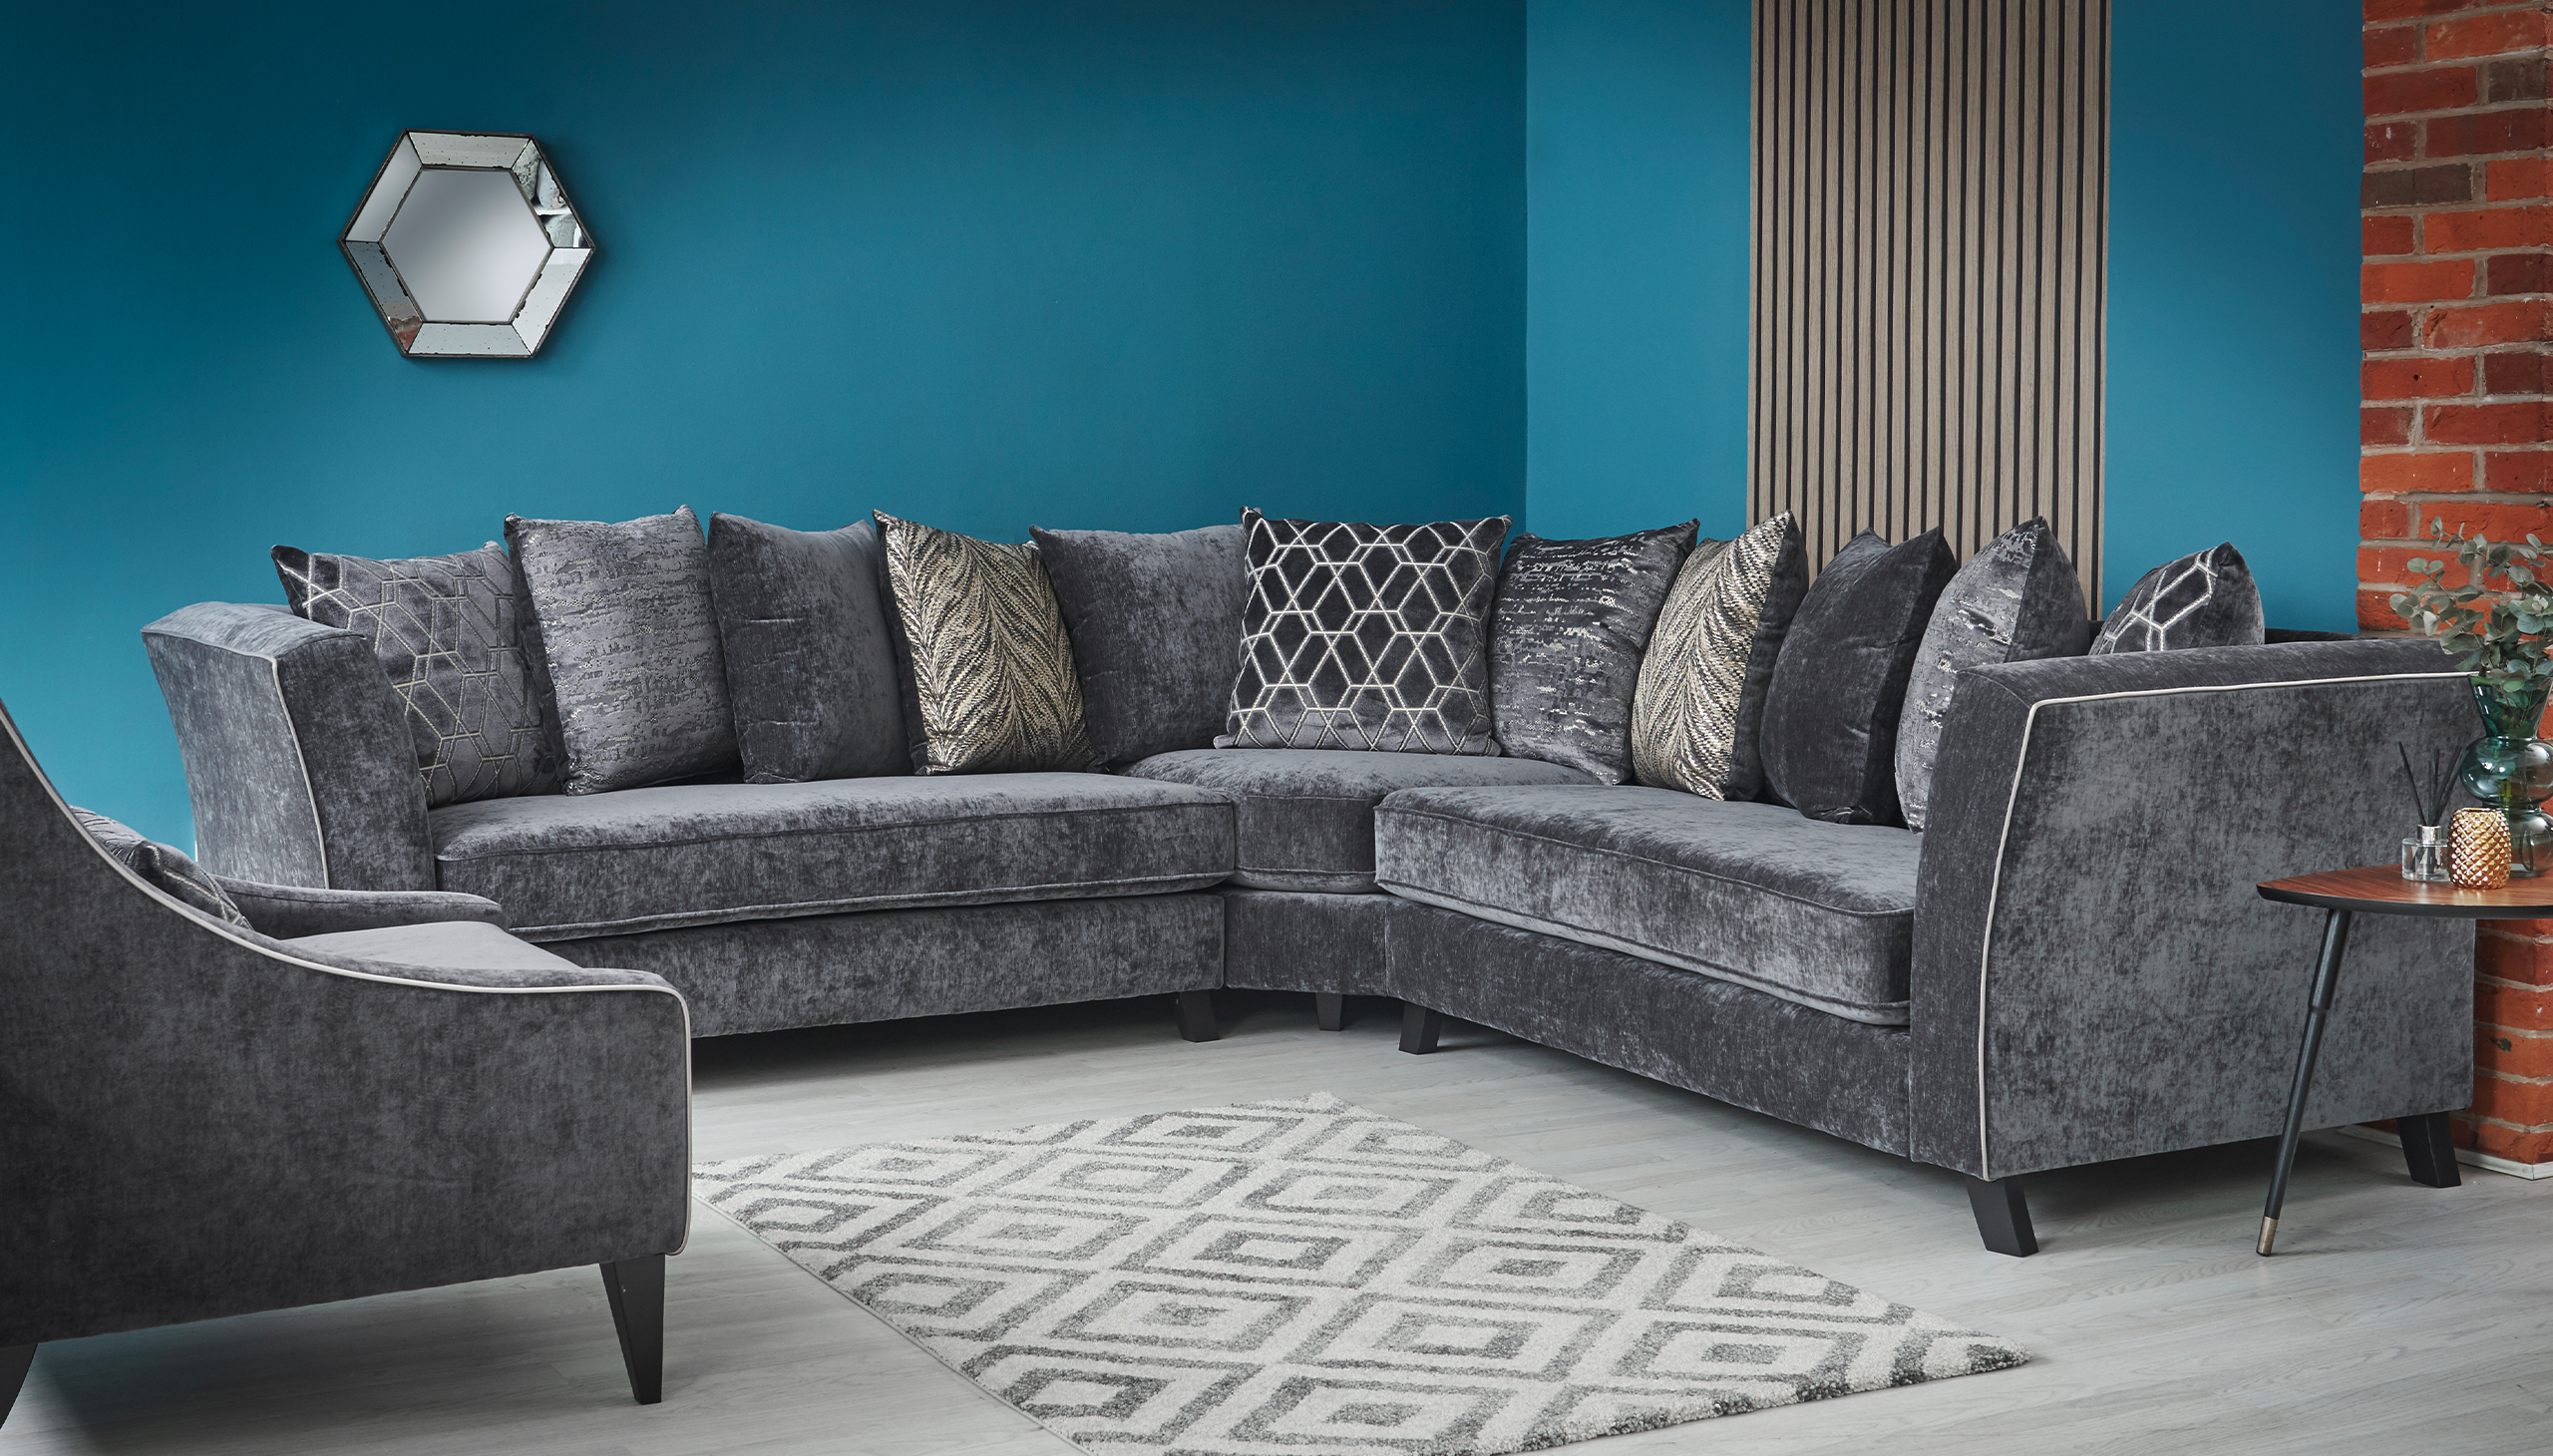 Orchestra 4 Seater Standard Back Sofa